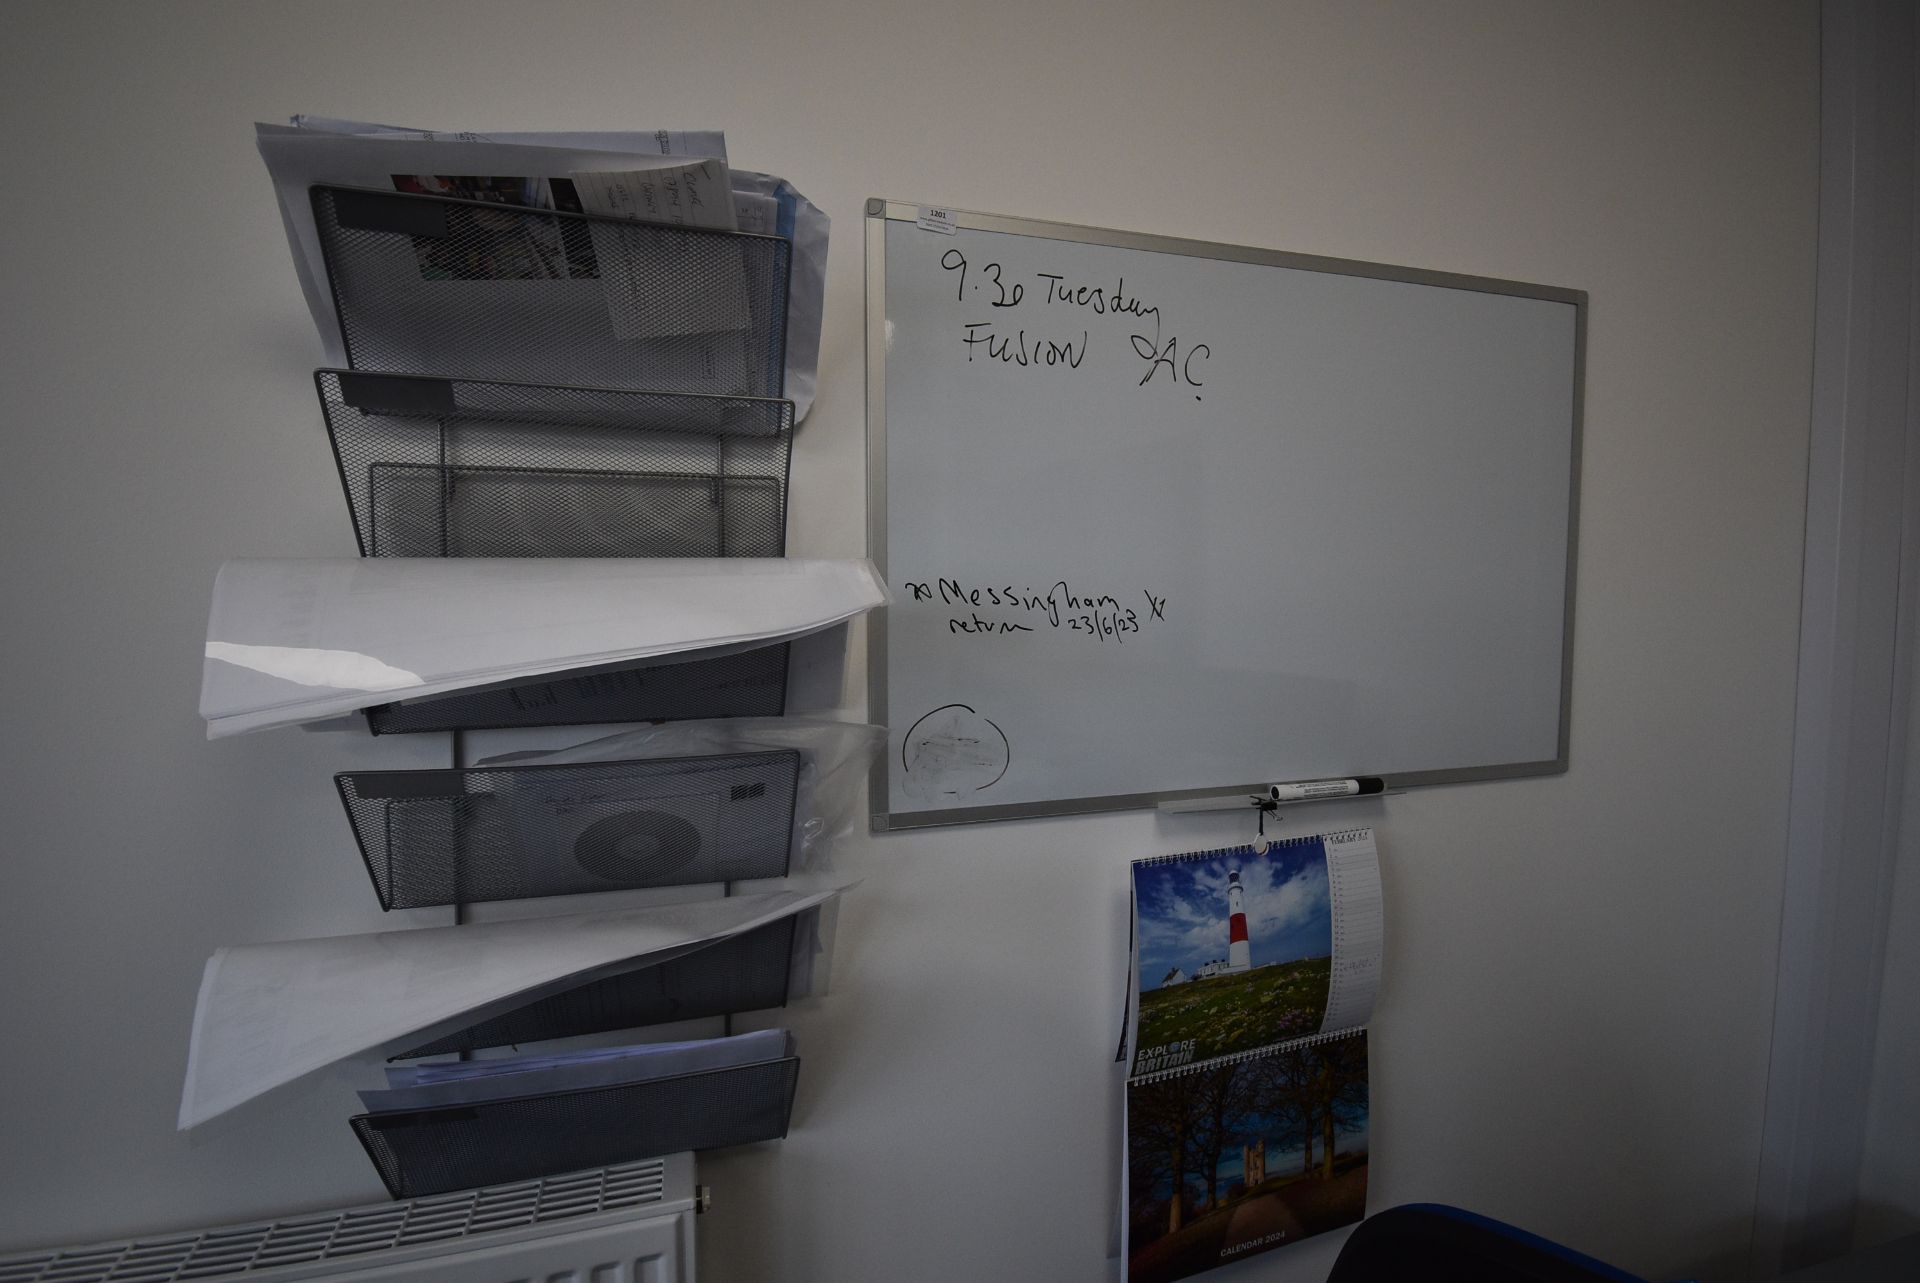 *Whiteboard and Document Storage (Location: 64 King Edward St, Grimsby, DN31 3JP, Viewing Tuesday